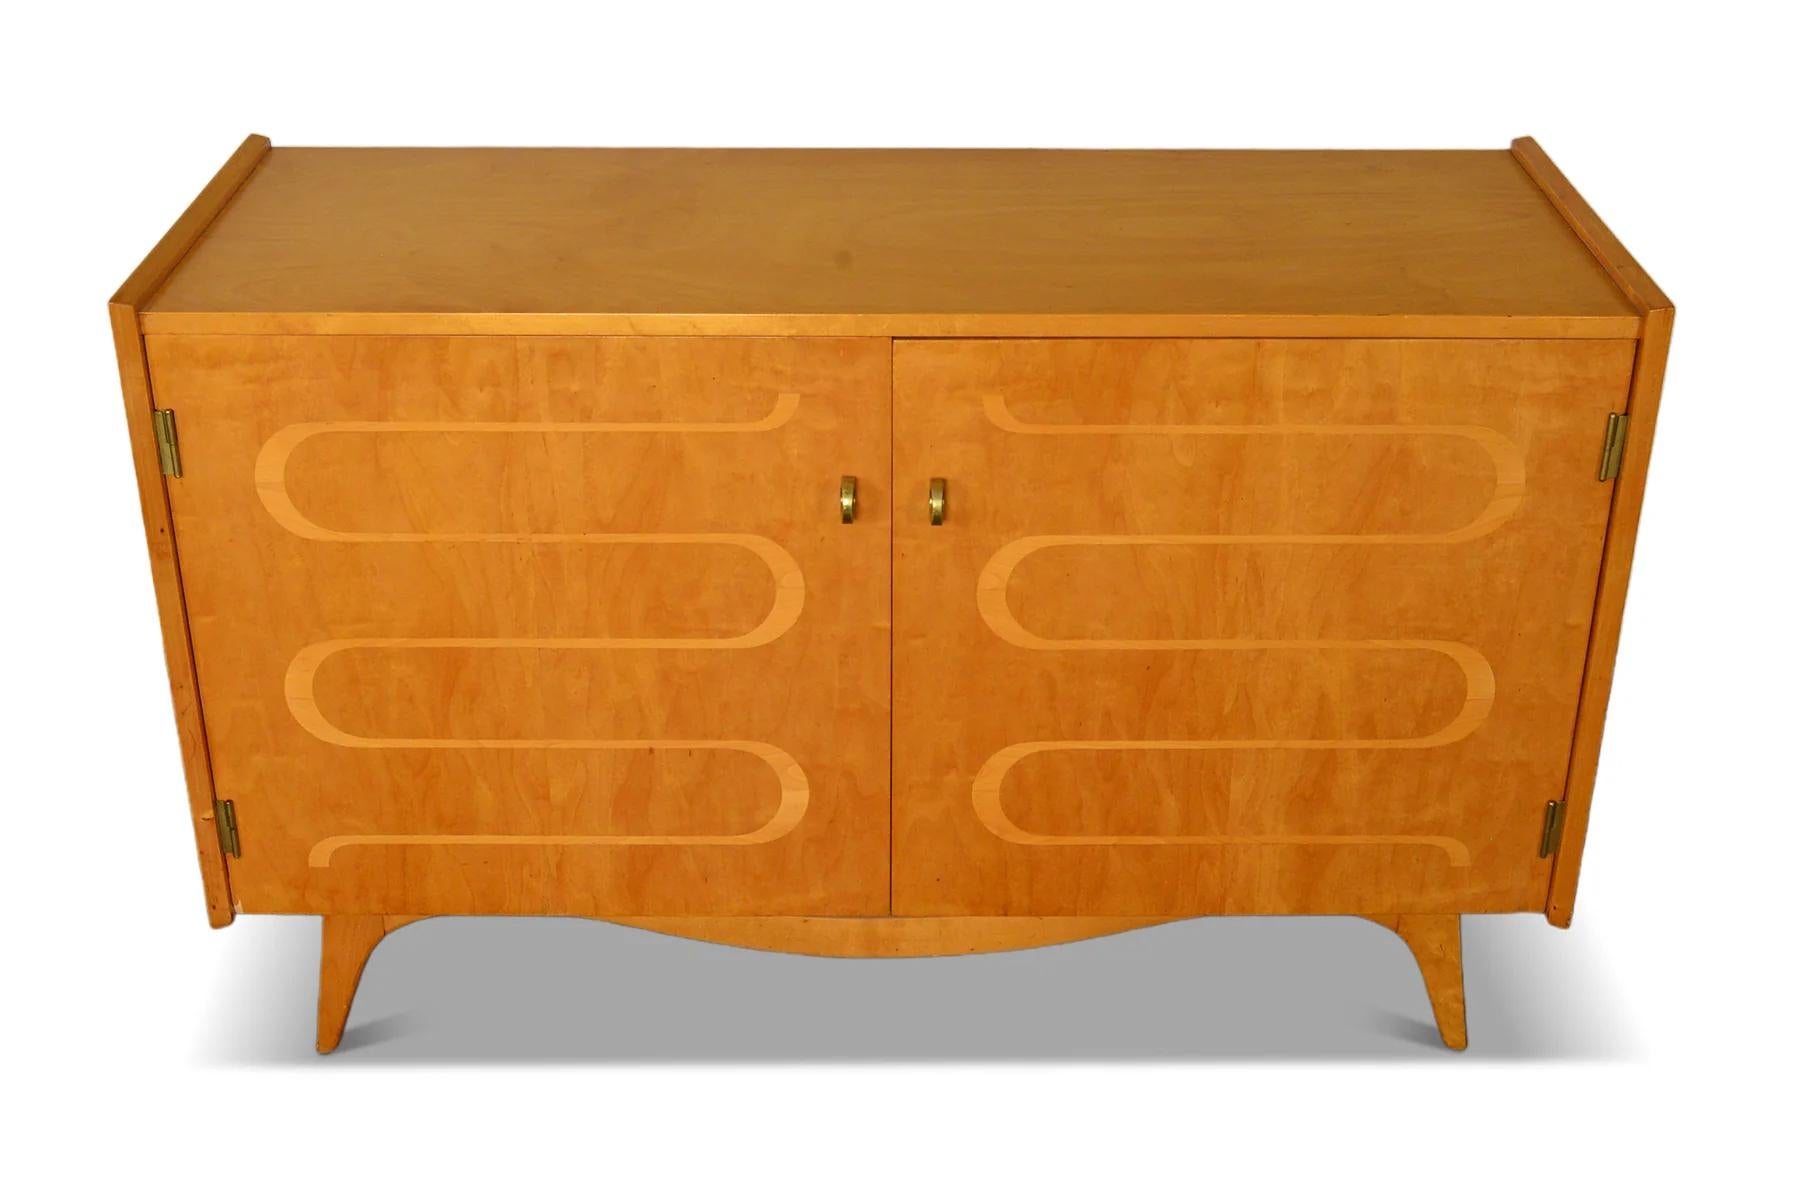 Swedish Modern Inlay Credenza in Beech In Excellent Condition For Sale In Berkeley, CA